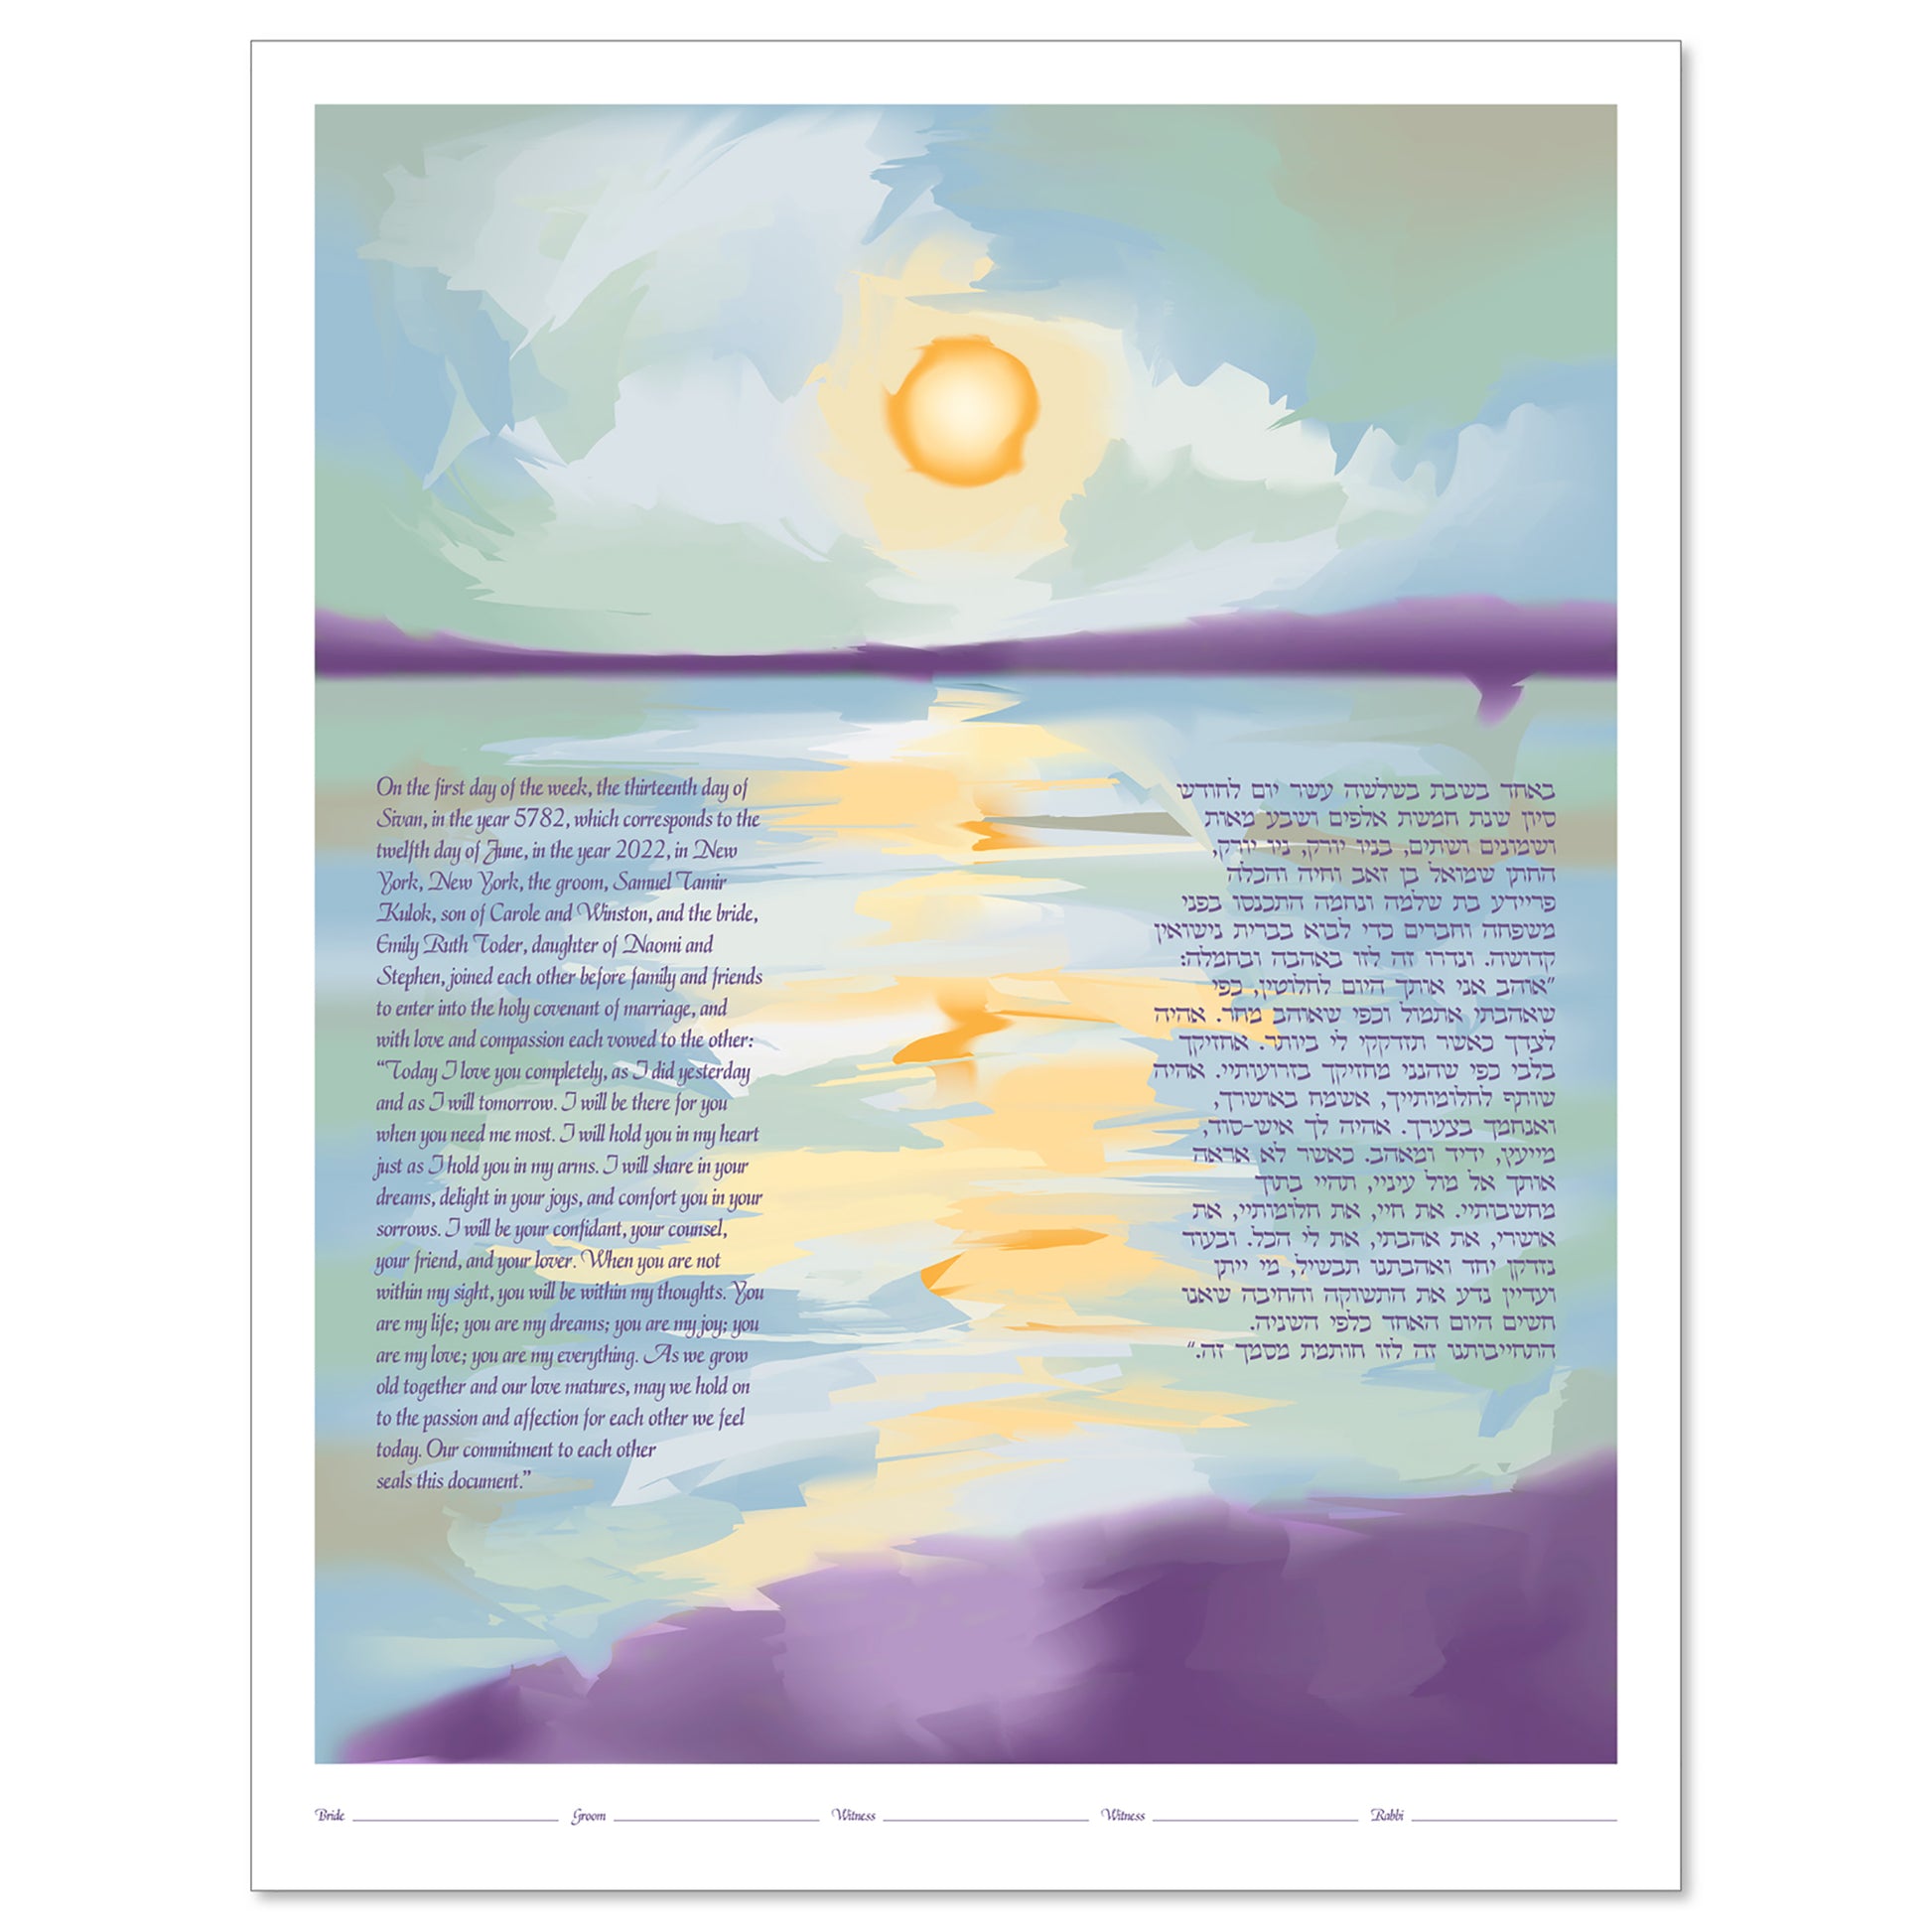 Expression Sunrise ketubah by Micah Parker in purple, green, blue, and yellow.